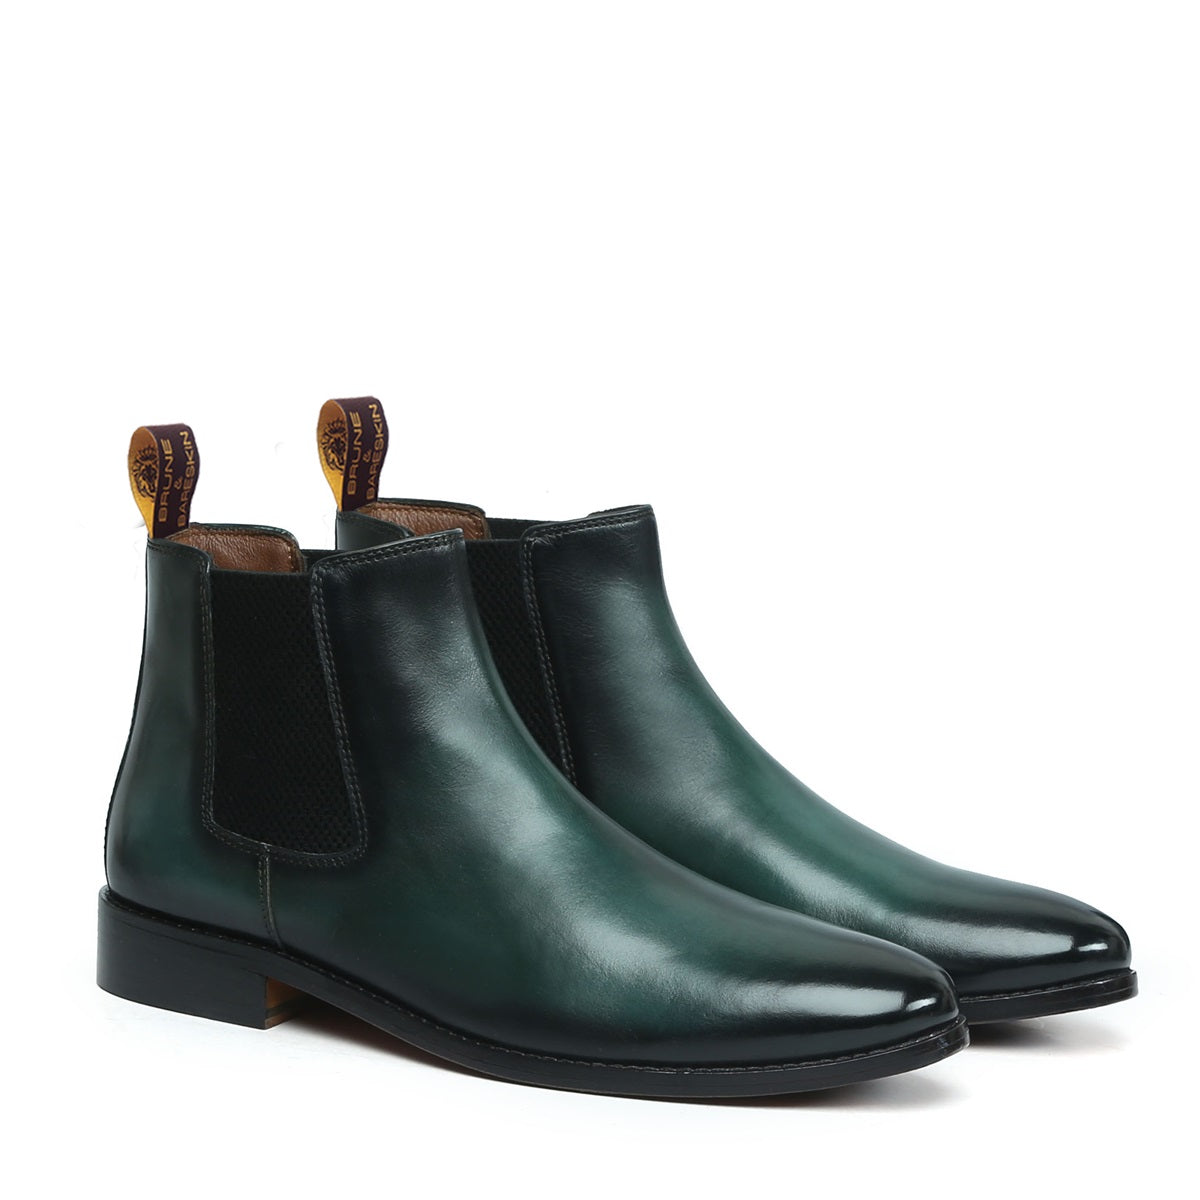 Green Leather With Leather Sole Hand Made Chelsea Boots For Men By Brune & Bareskin